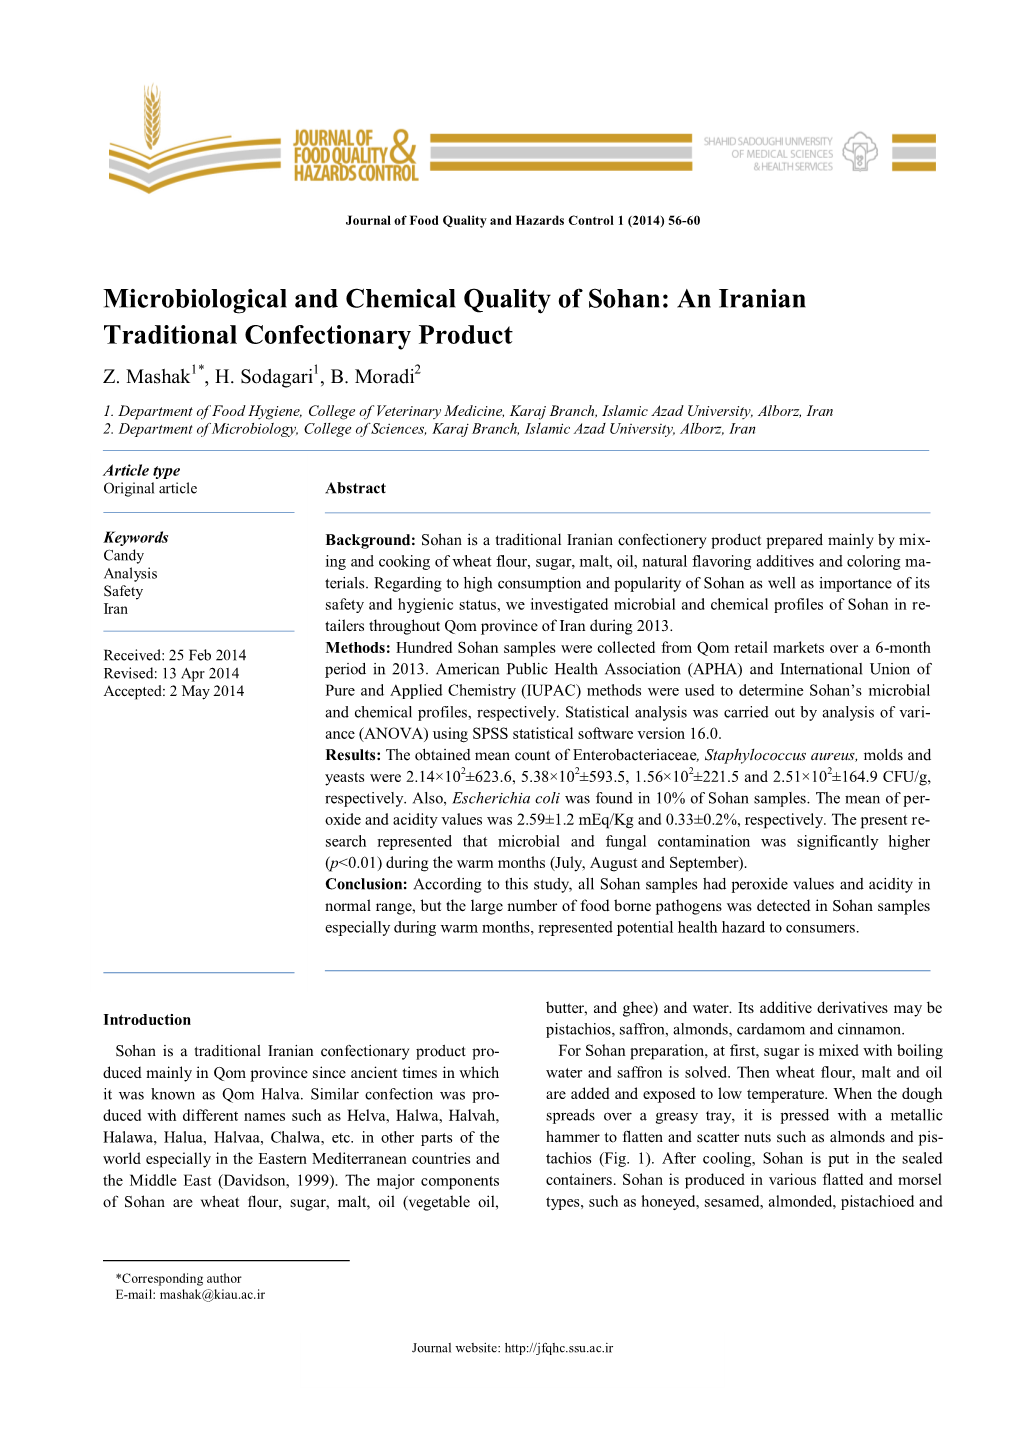 Microbiological and Chemical Quality of Sohan: an Iranian Traditional Confectionary Product Z